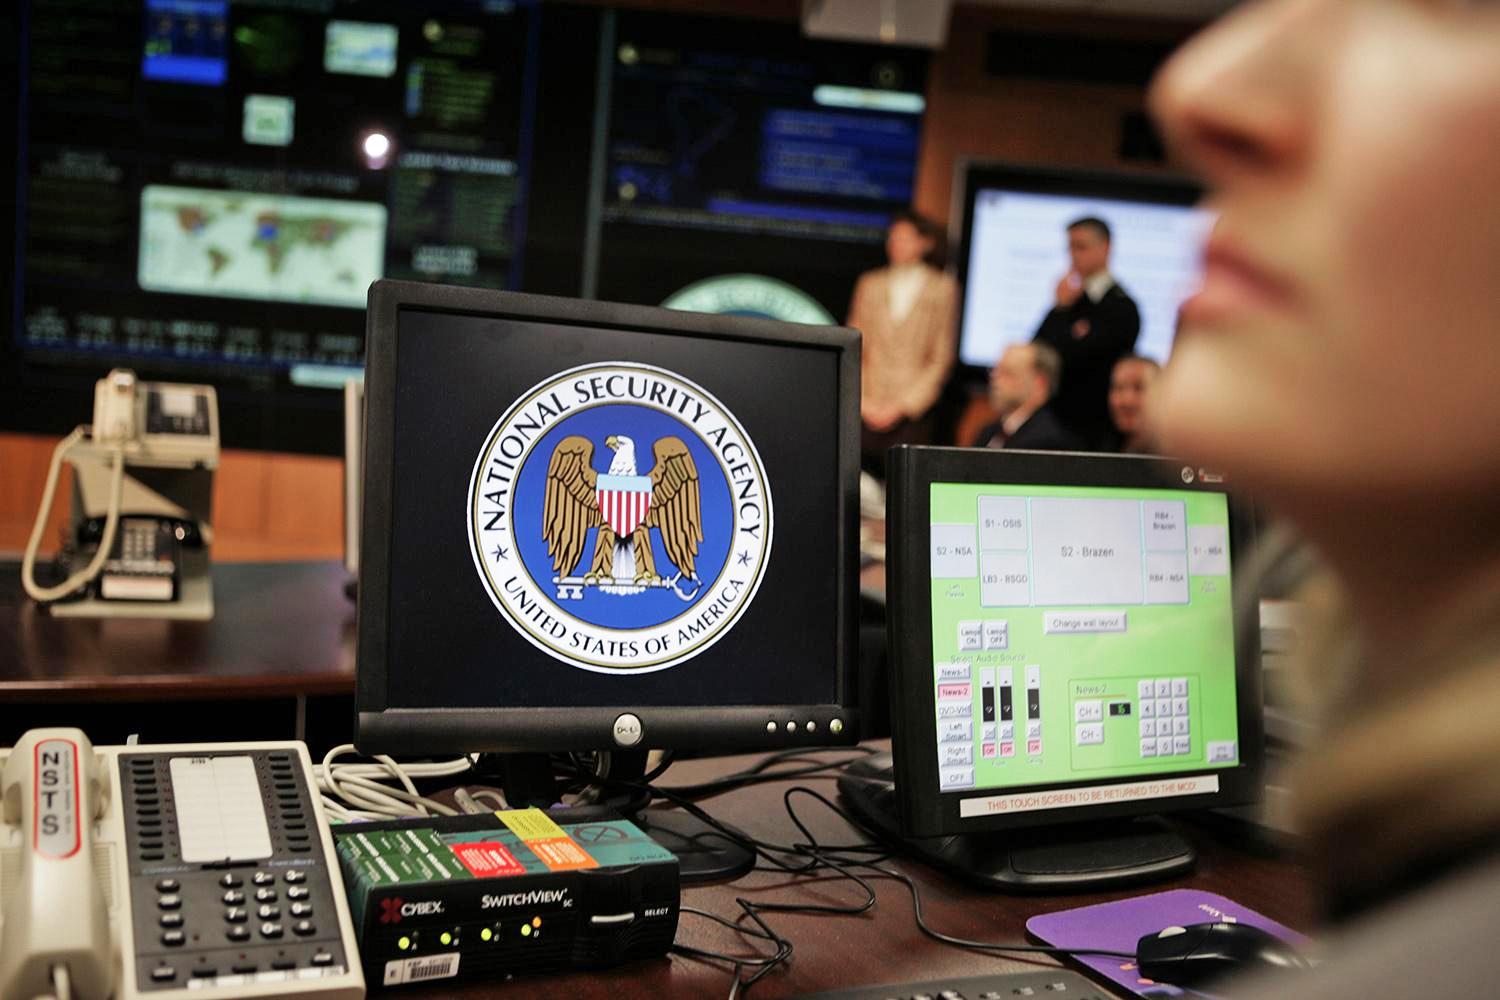 usa freedom act passes in senate with 67 32 vote nsa computers heartbleed bug